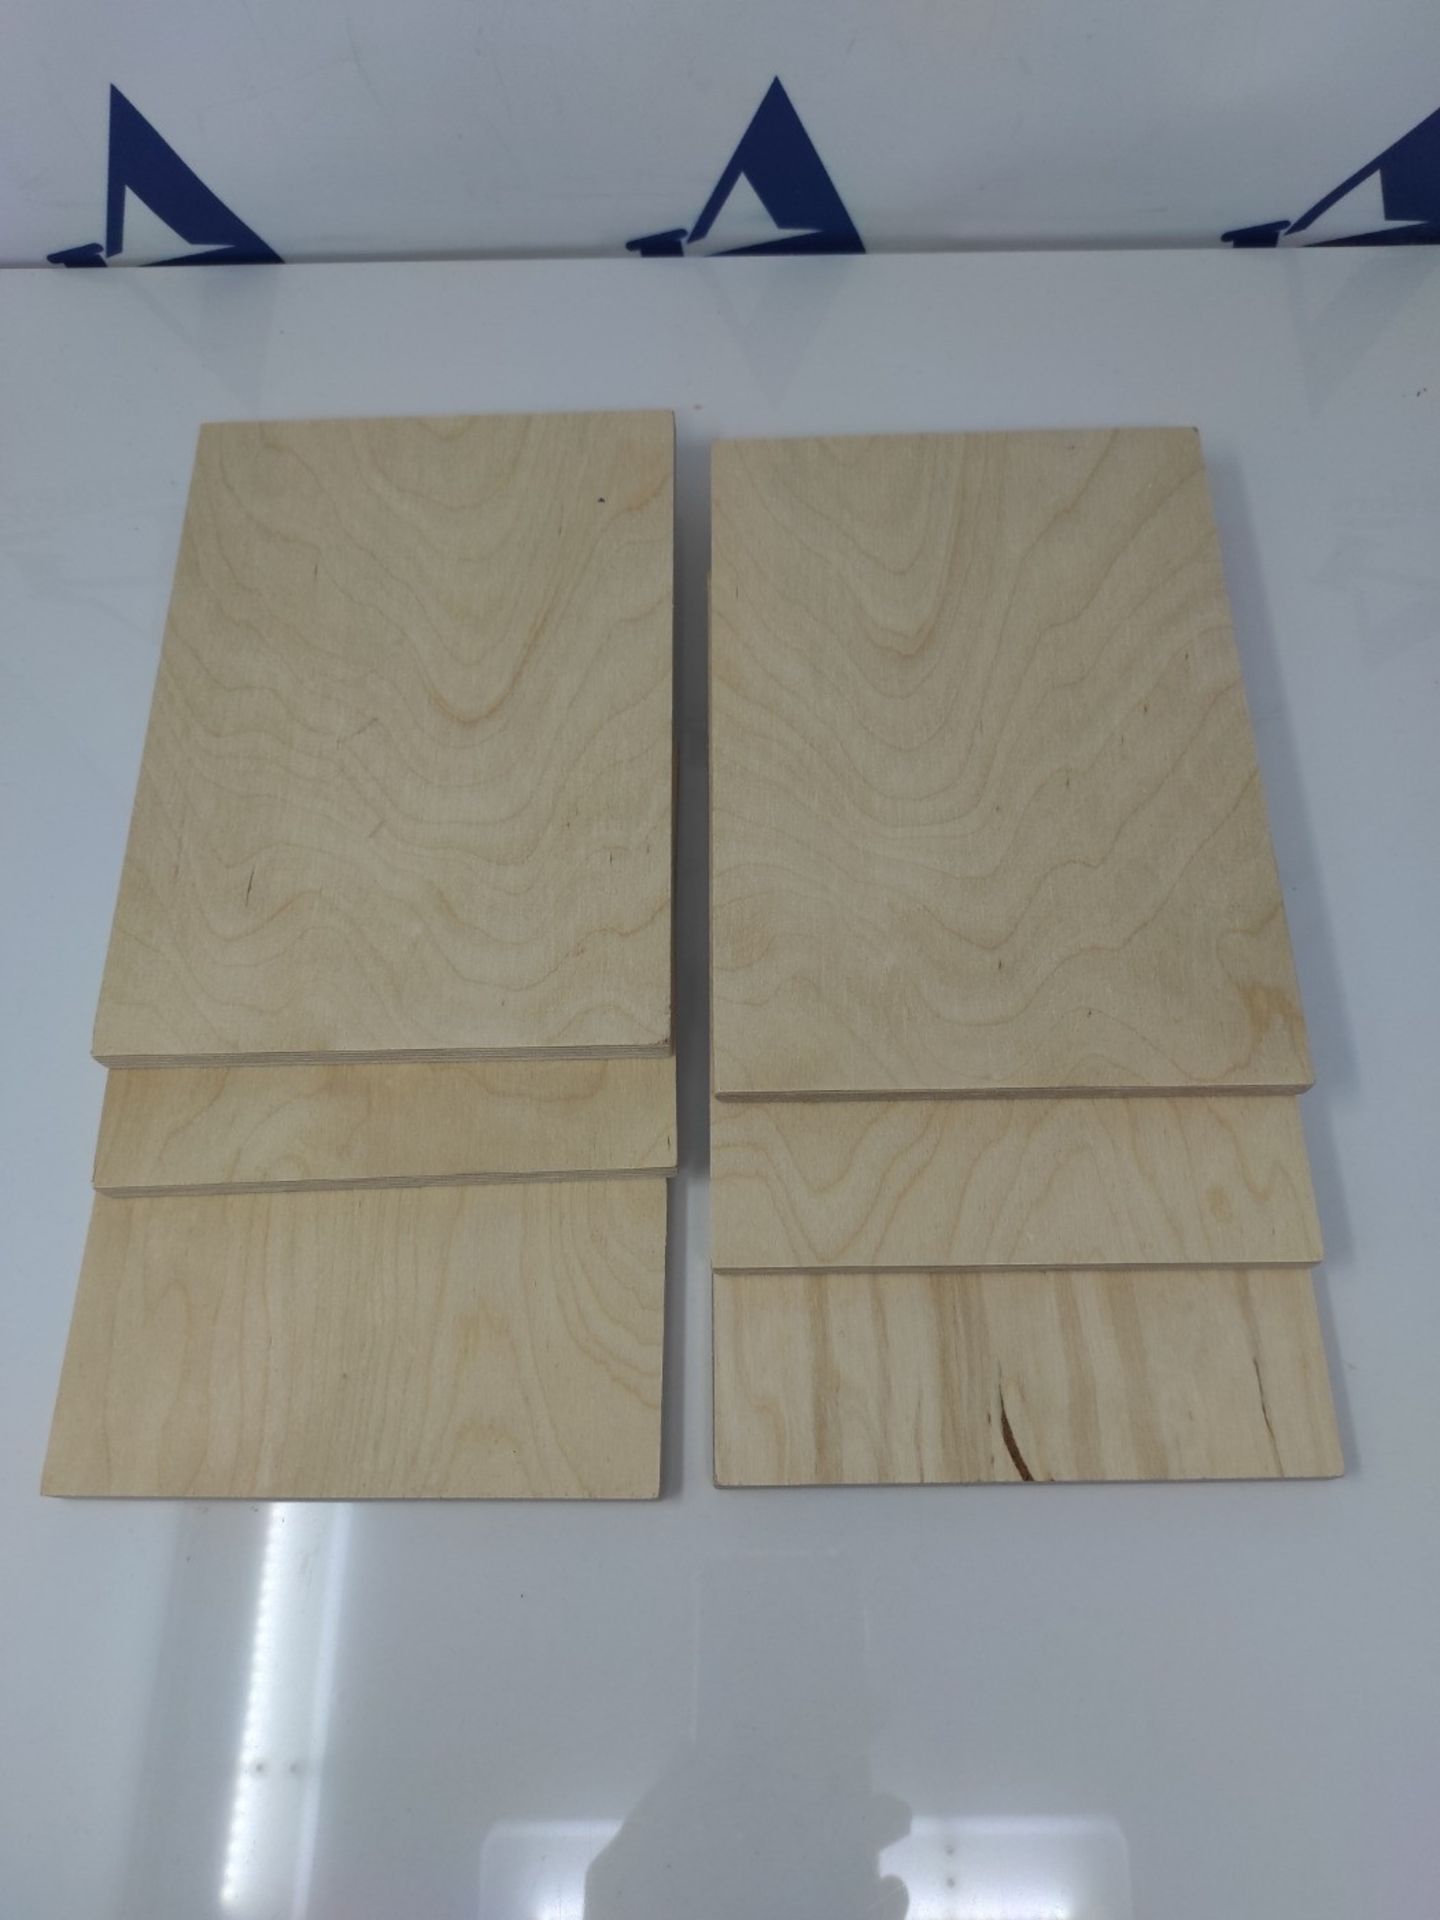 AUPROTEC 10x A5 Plywood Sheets 10mm Birch (148 mm x 210 mm) First Class Birchwood Soli